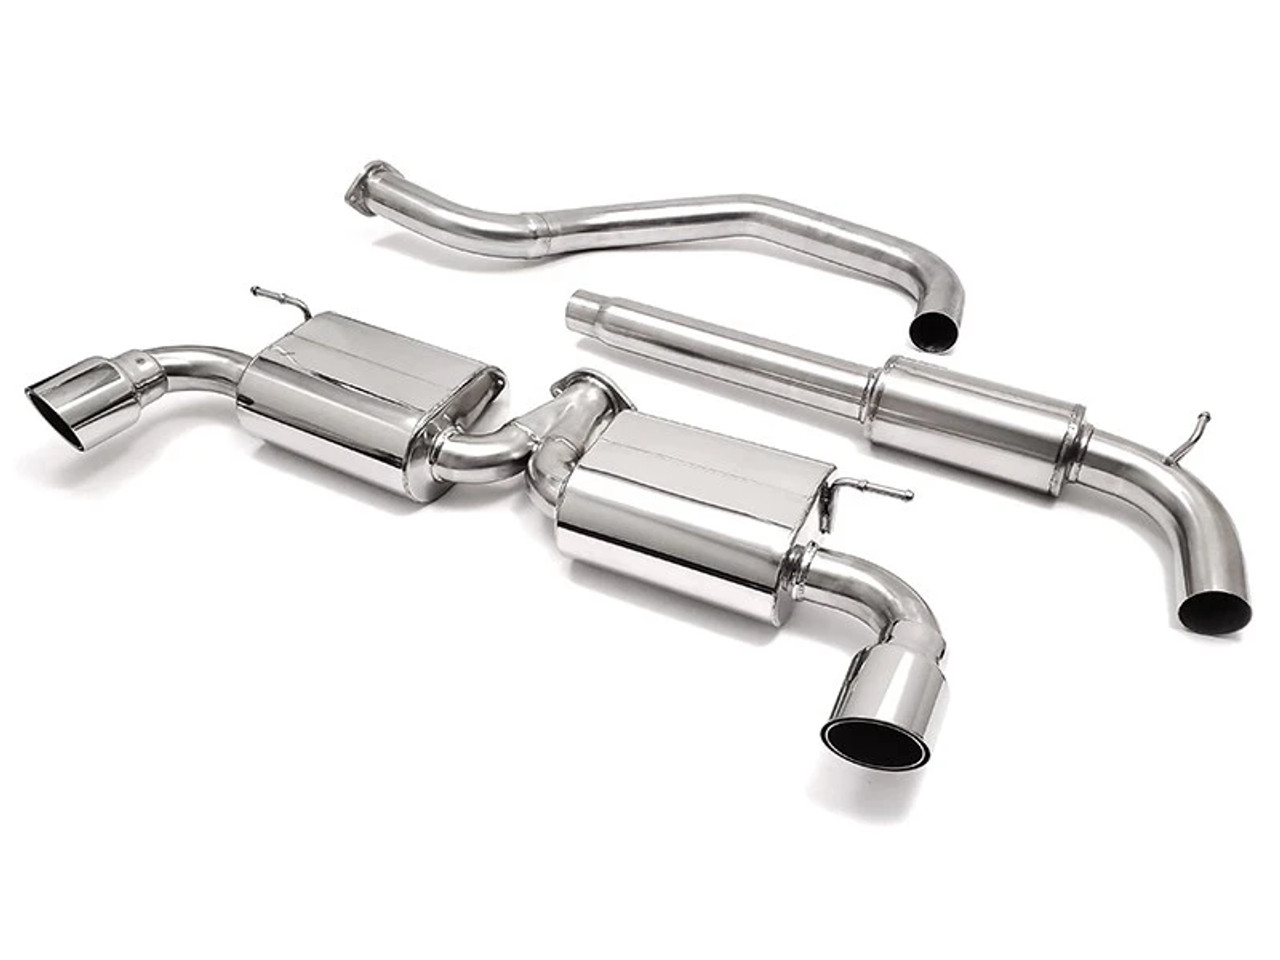 An exhaust system in three seperate parts